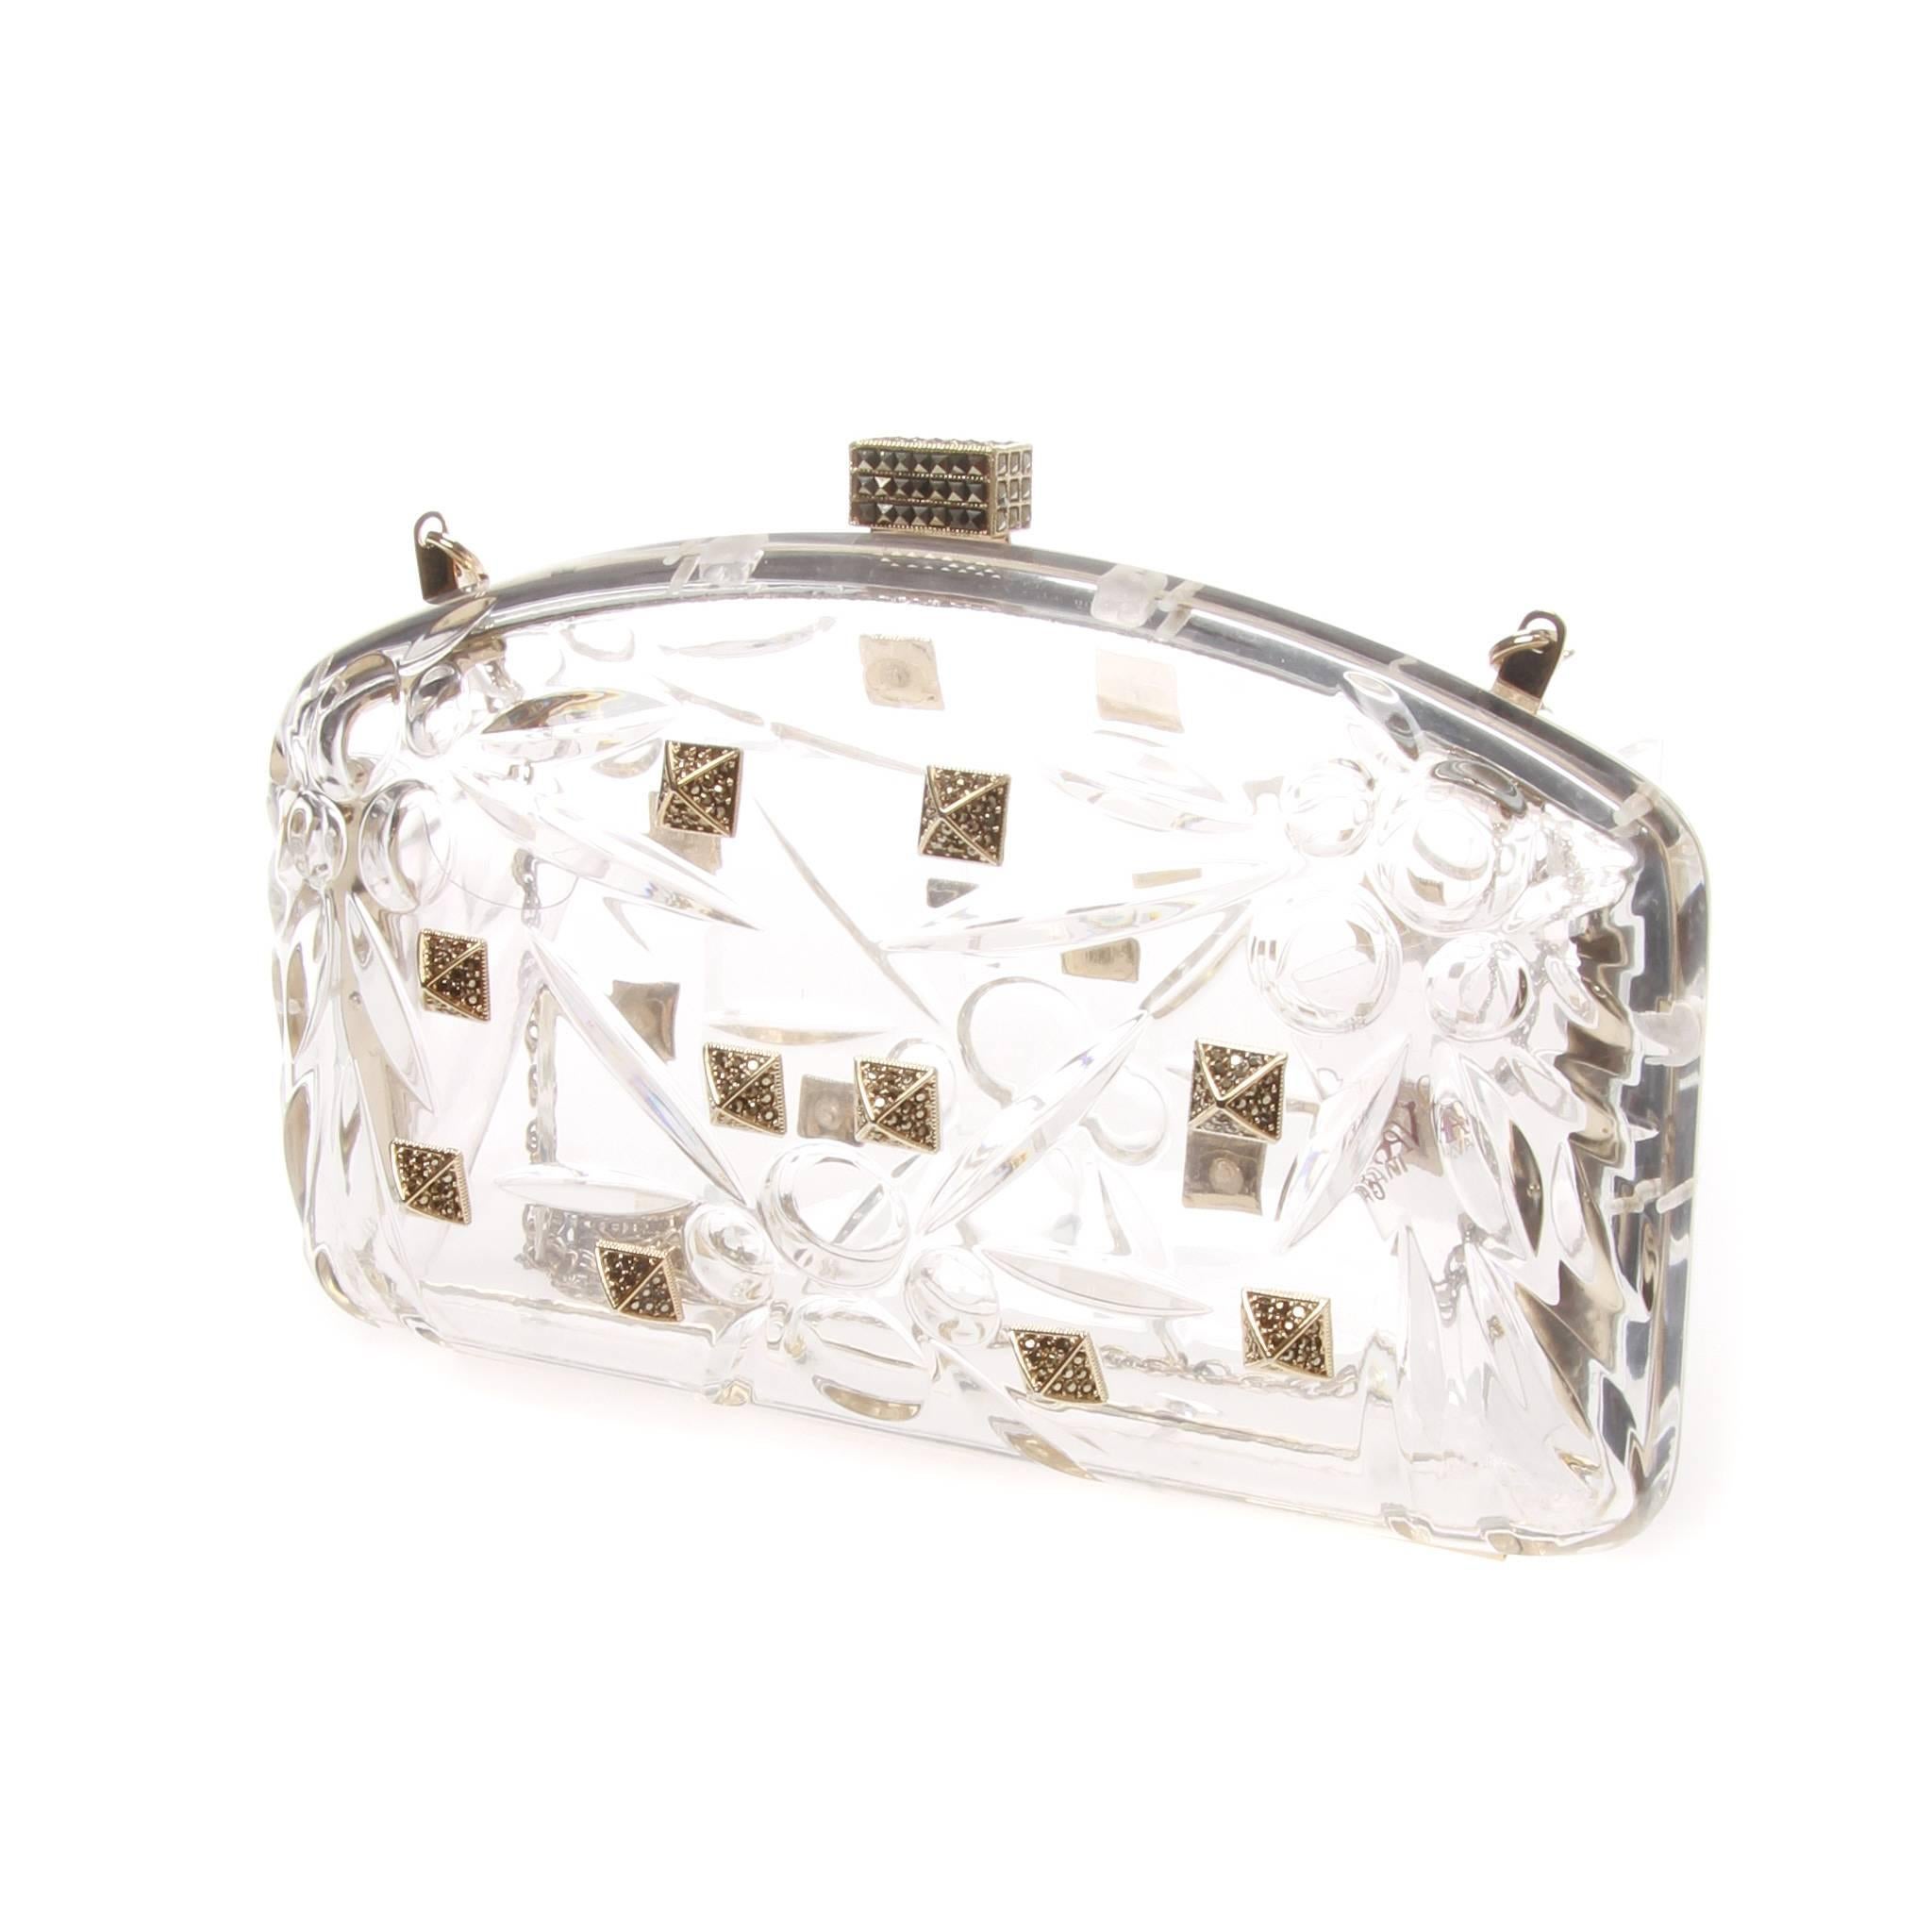 Valentino Garavani perspex box clutch embellished with crystal encrusted rock studs. Removable chain. 

